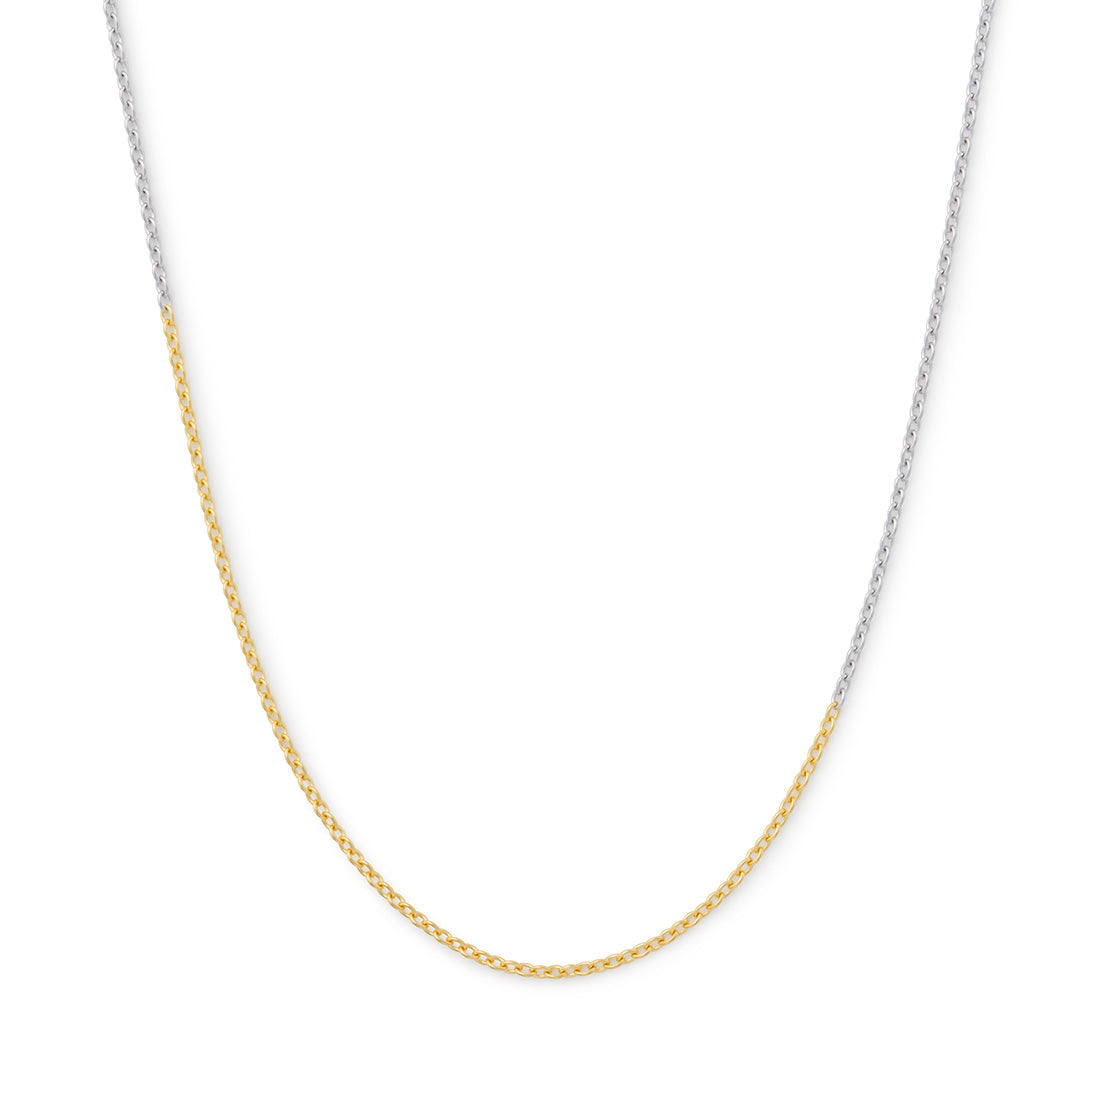 18K　Oval Chain　オーバルチェーン　Combination　コンビネーション　Necklace　ネックレス